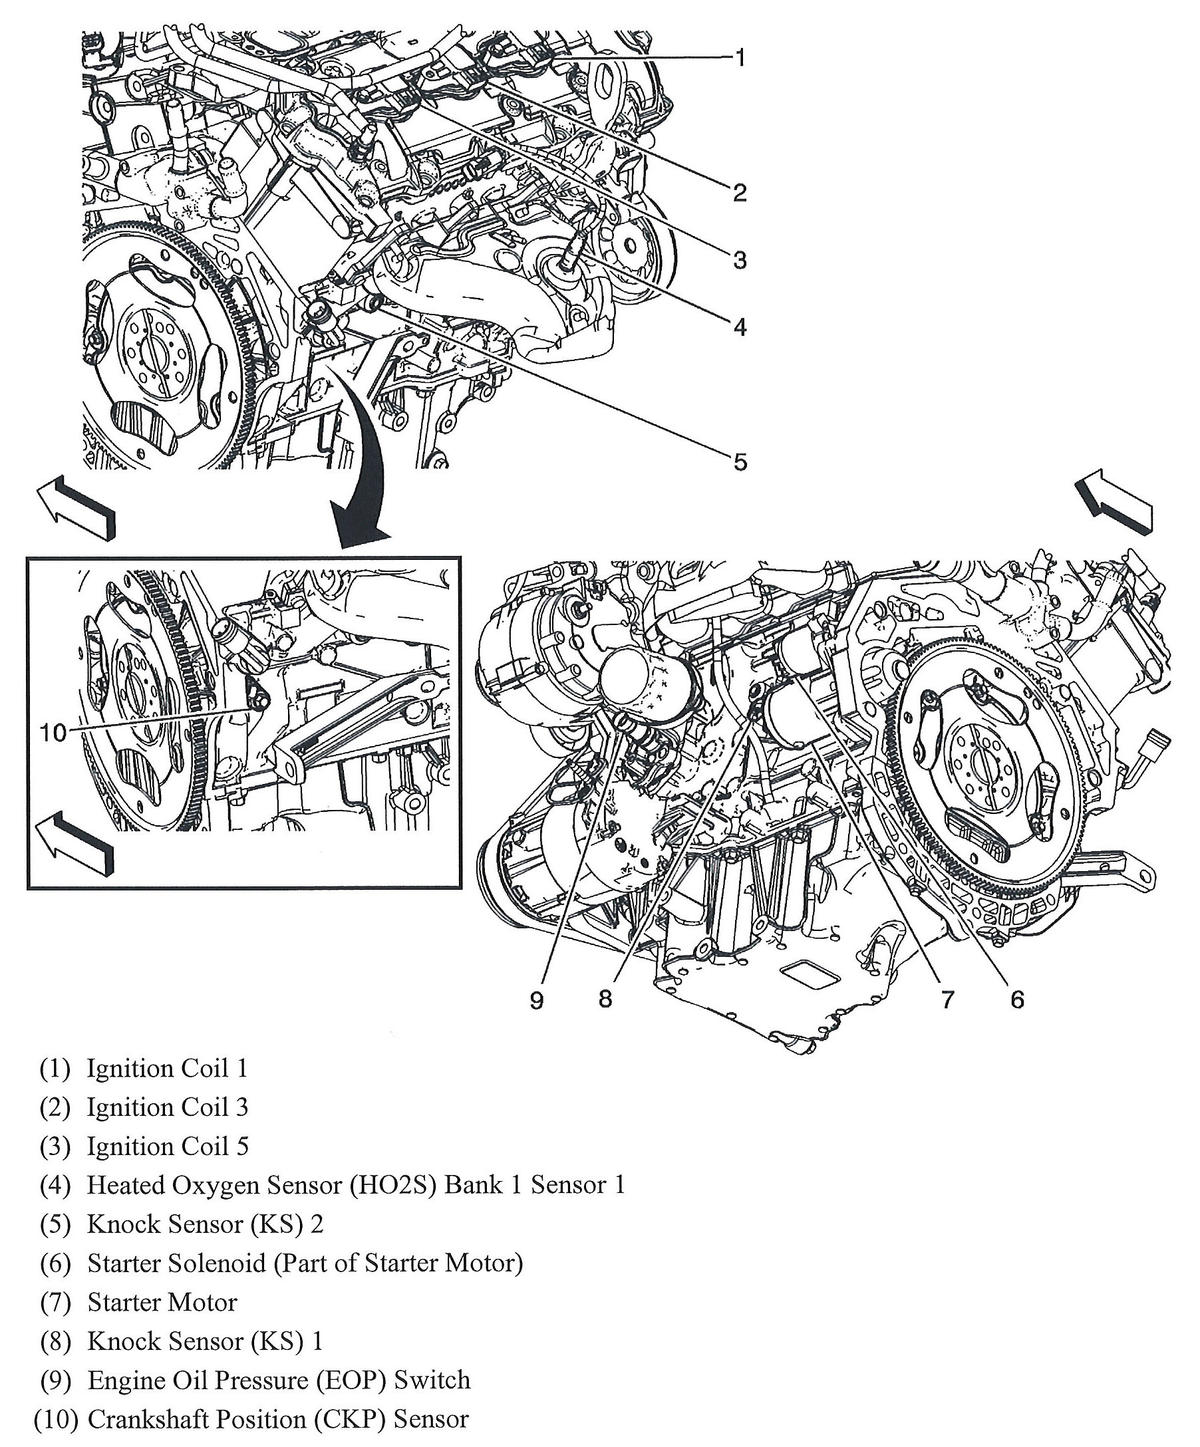 Chevrolet Malibu LT 2008 - Component Locations -  Left & Right Rear Of Engine (3.6L)